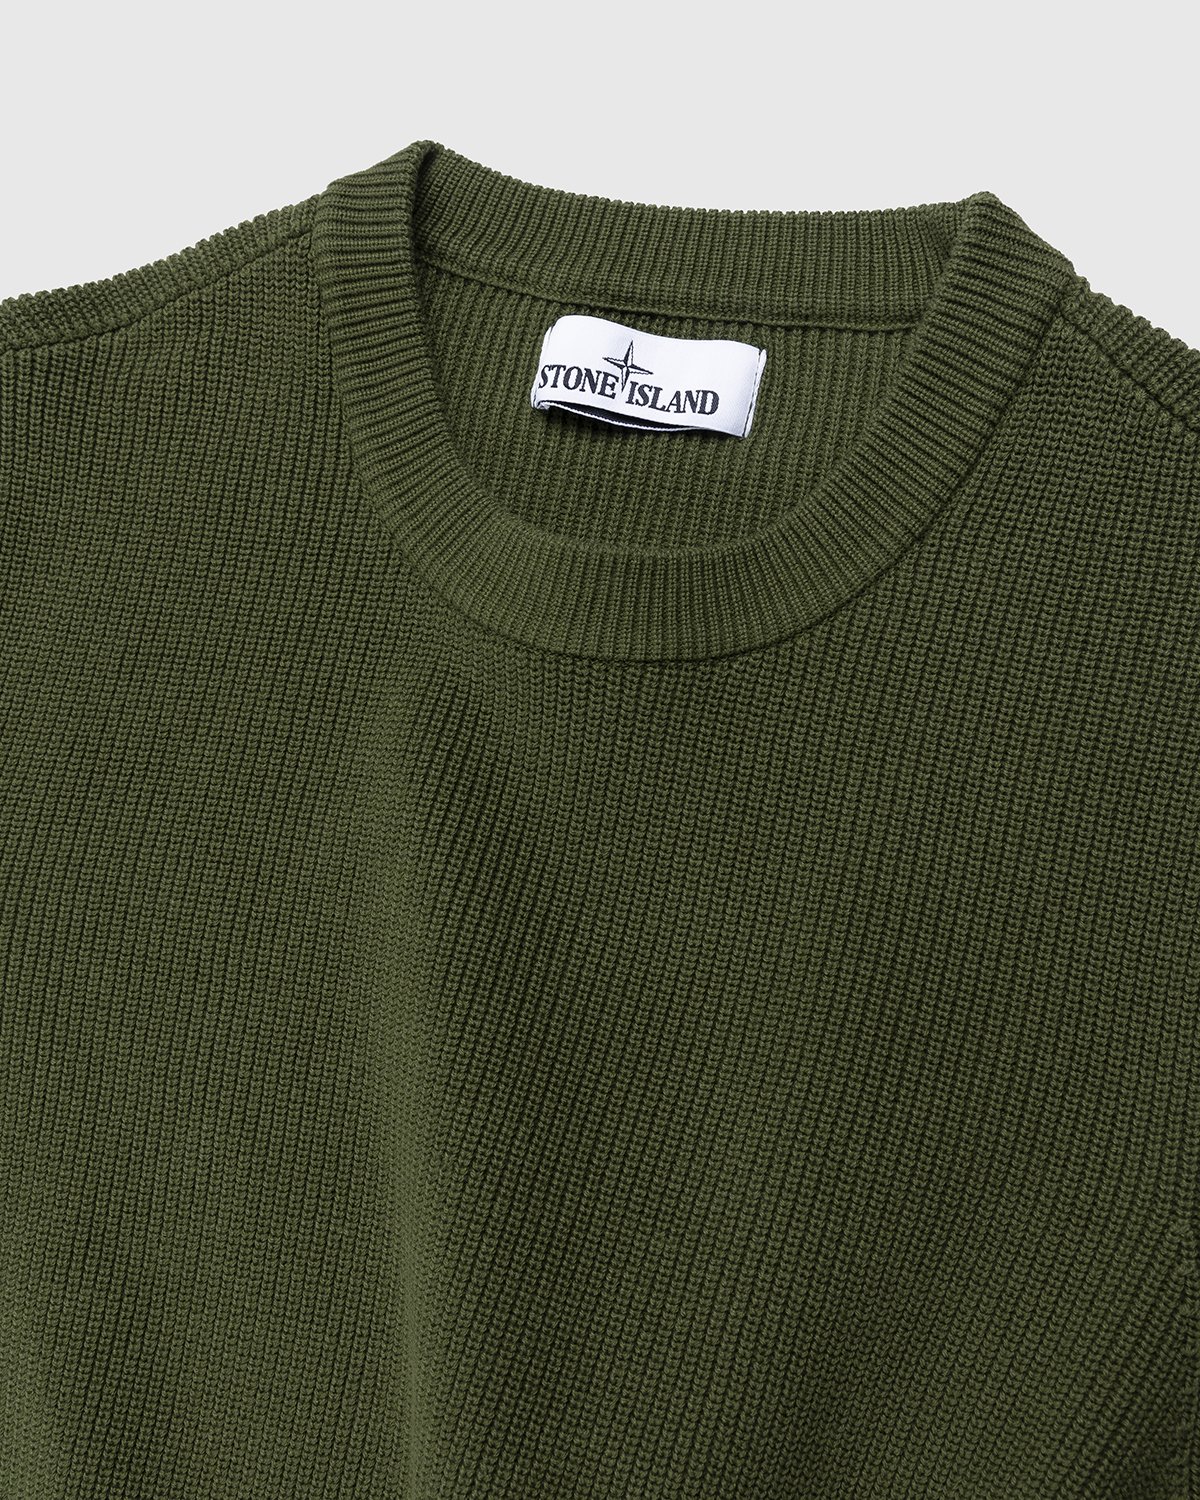 Stone Island - 550D8 Ribbed Soft Cotton Knit Olive - Clothing - Green - Image 5